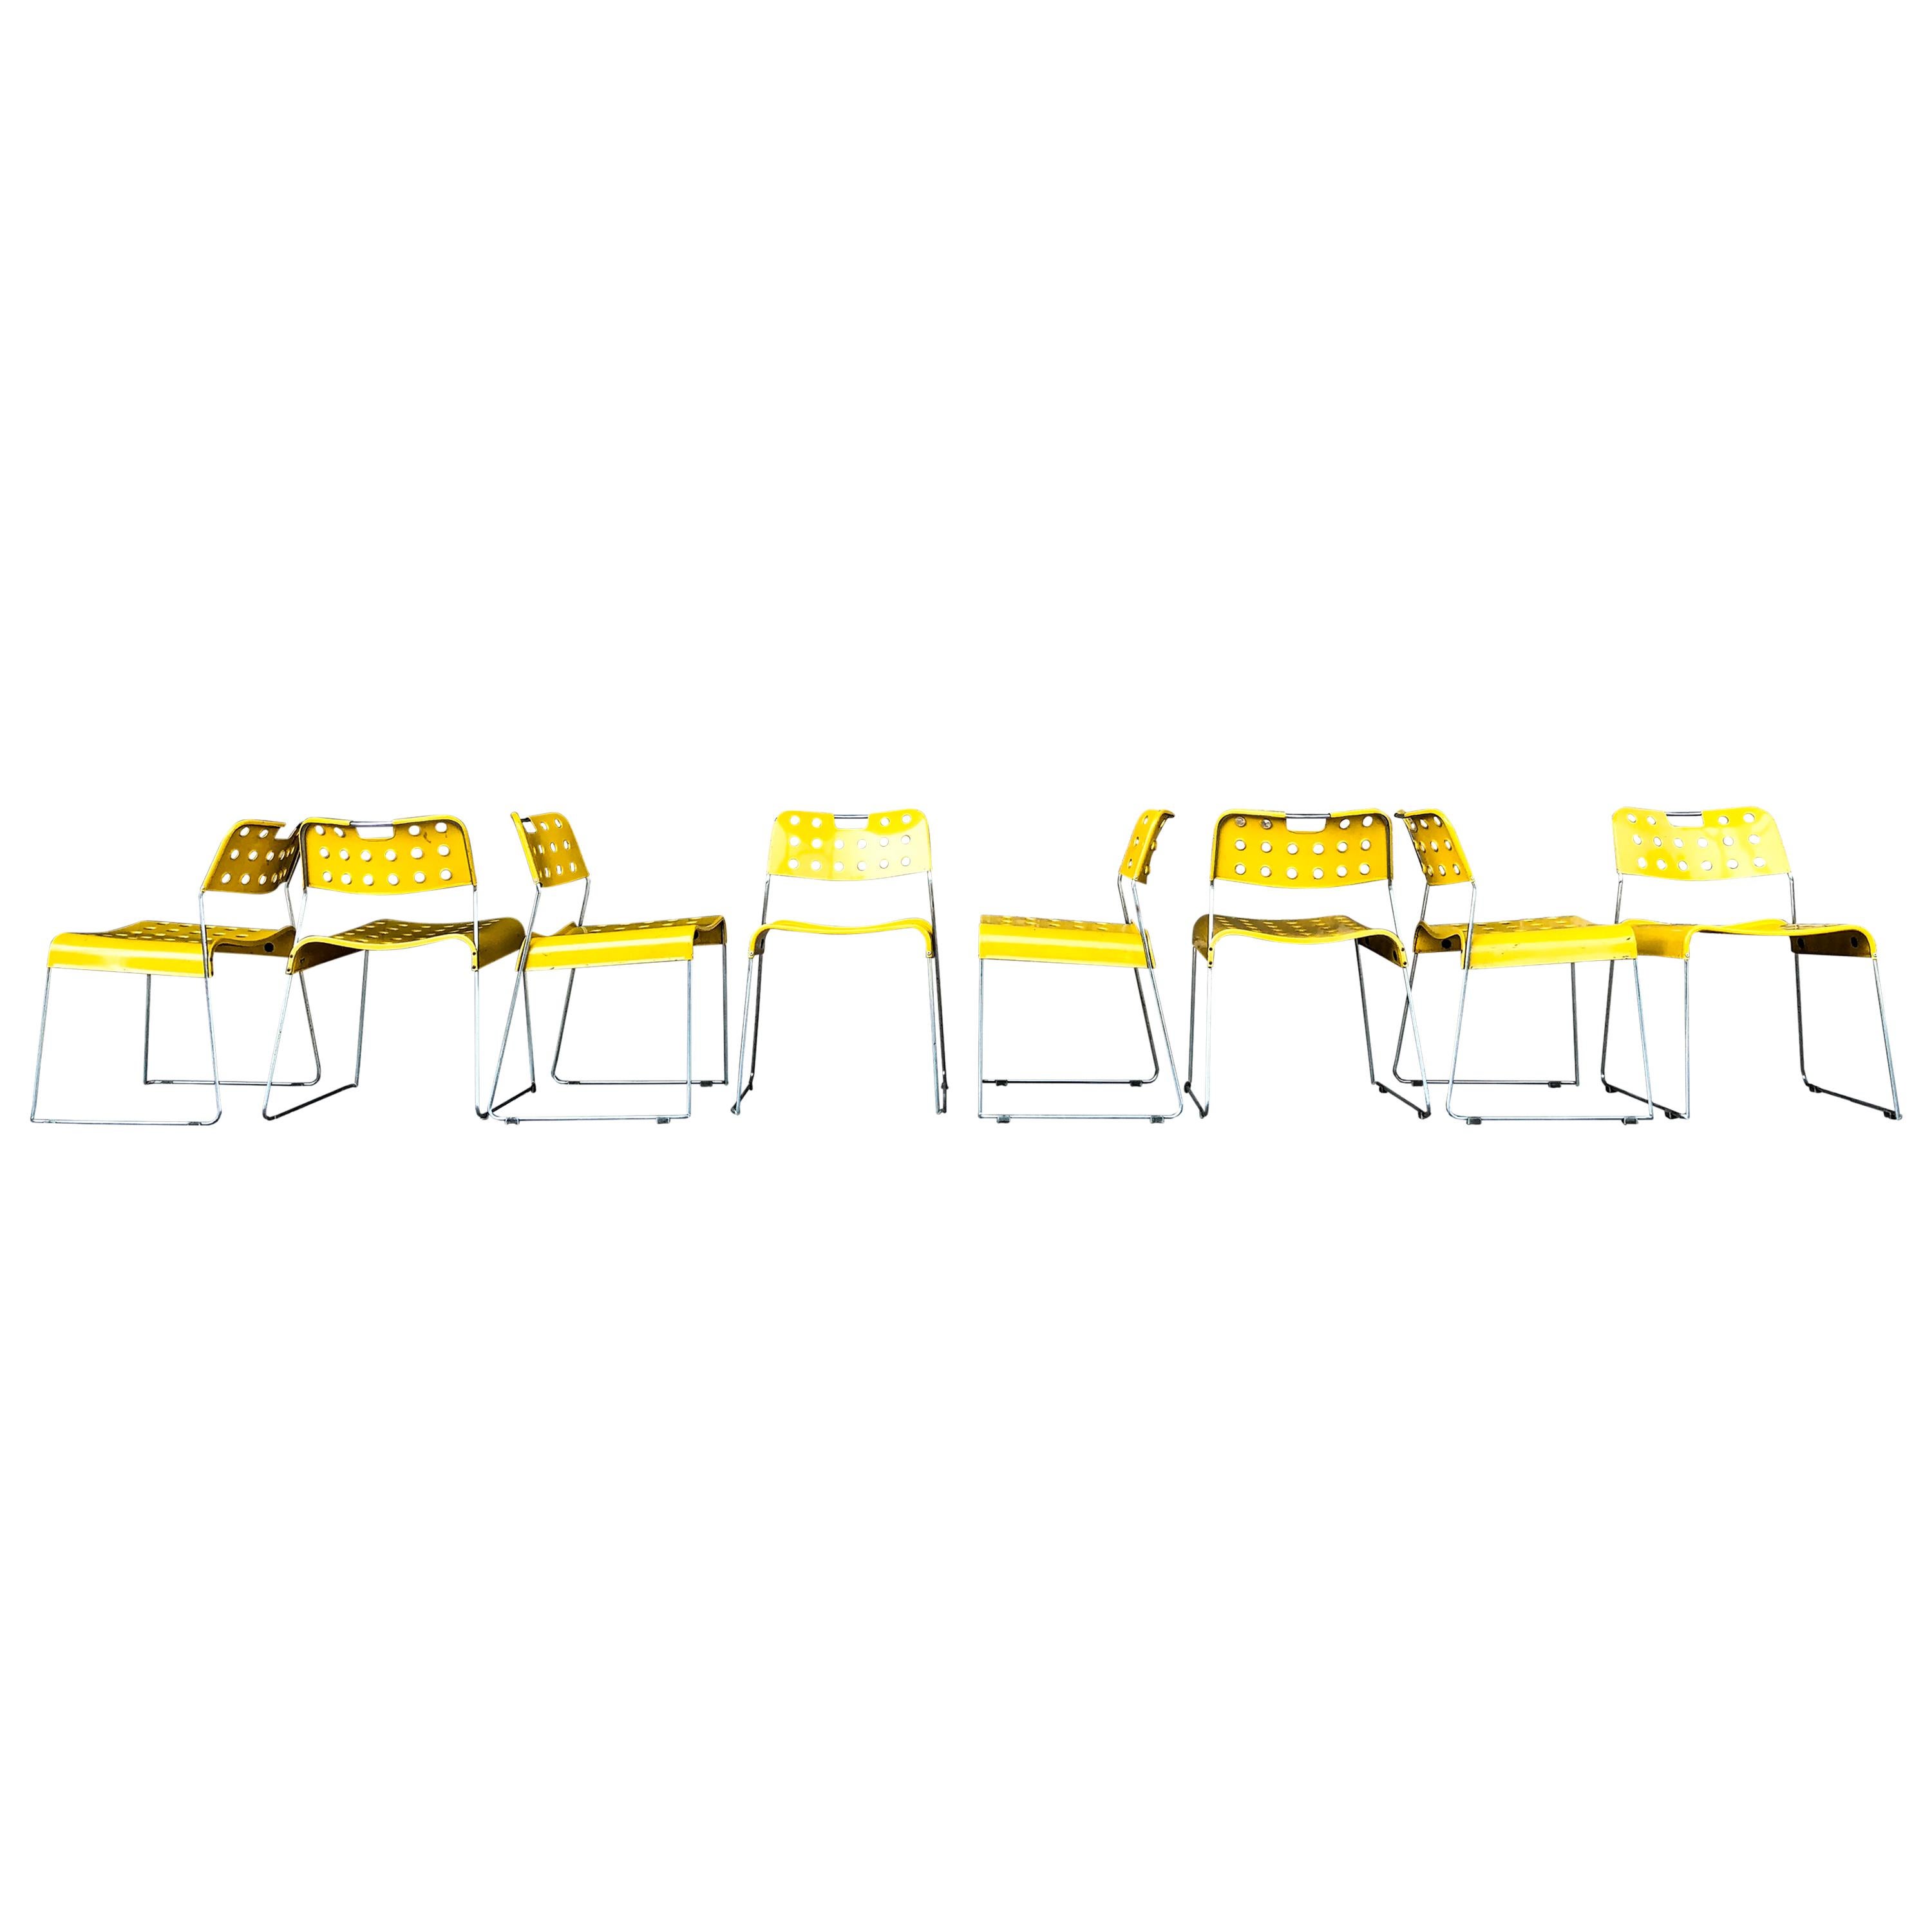 Steel Rodney Kinsman Space Age Yellow Omstak Chair for Bieffeplast, 1971, Set of 10 For Sale